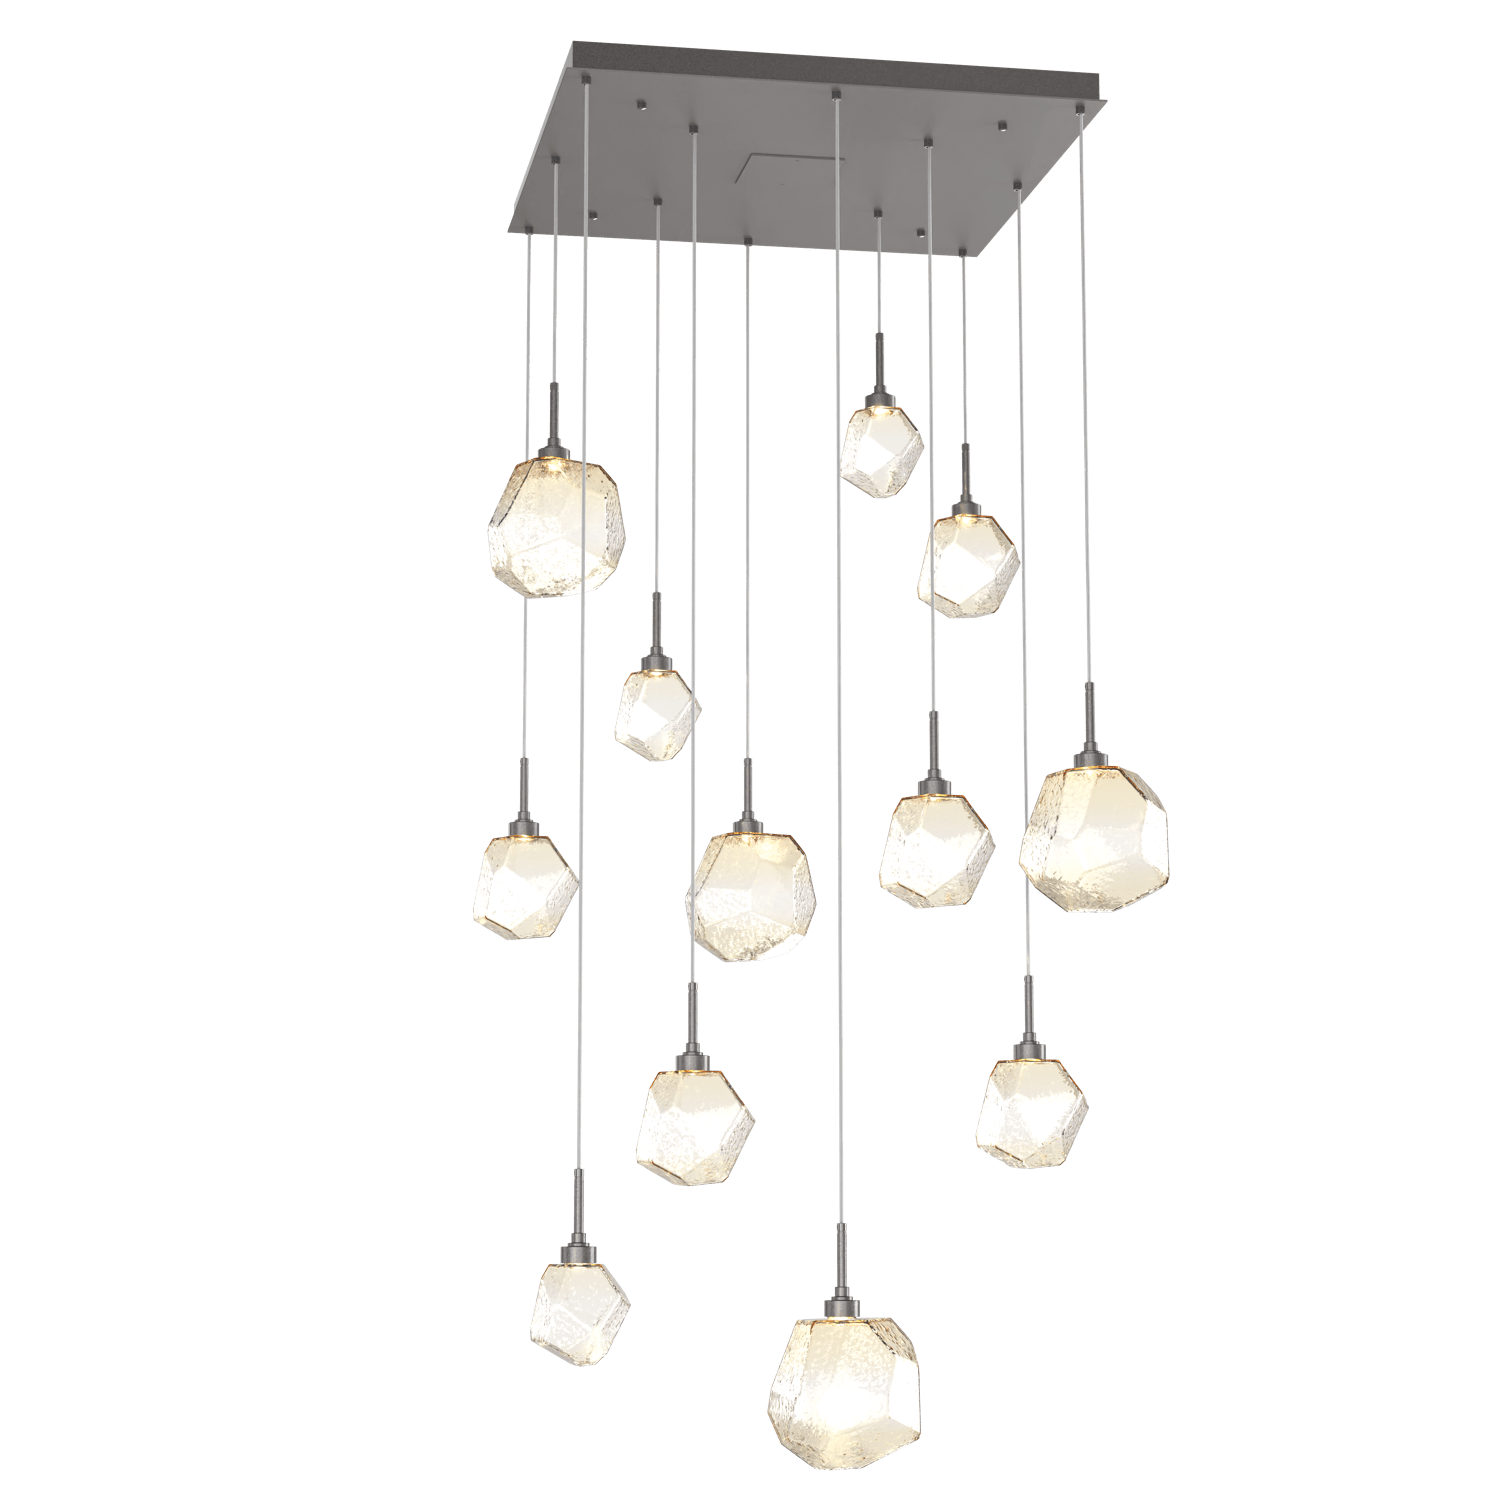 CHB0039-12-GP-A-Hammerton-Studio-Gem-12-light-square-pendant-chandelier-with-graphite-finish-and-amber-blown-glass-shades-and-LED-lamping